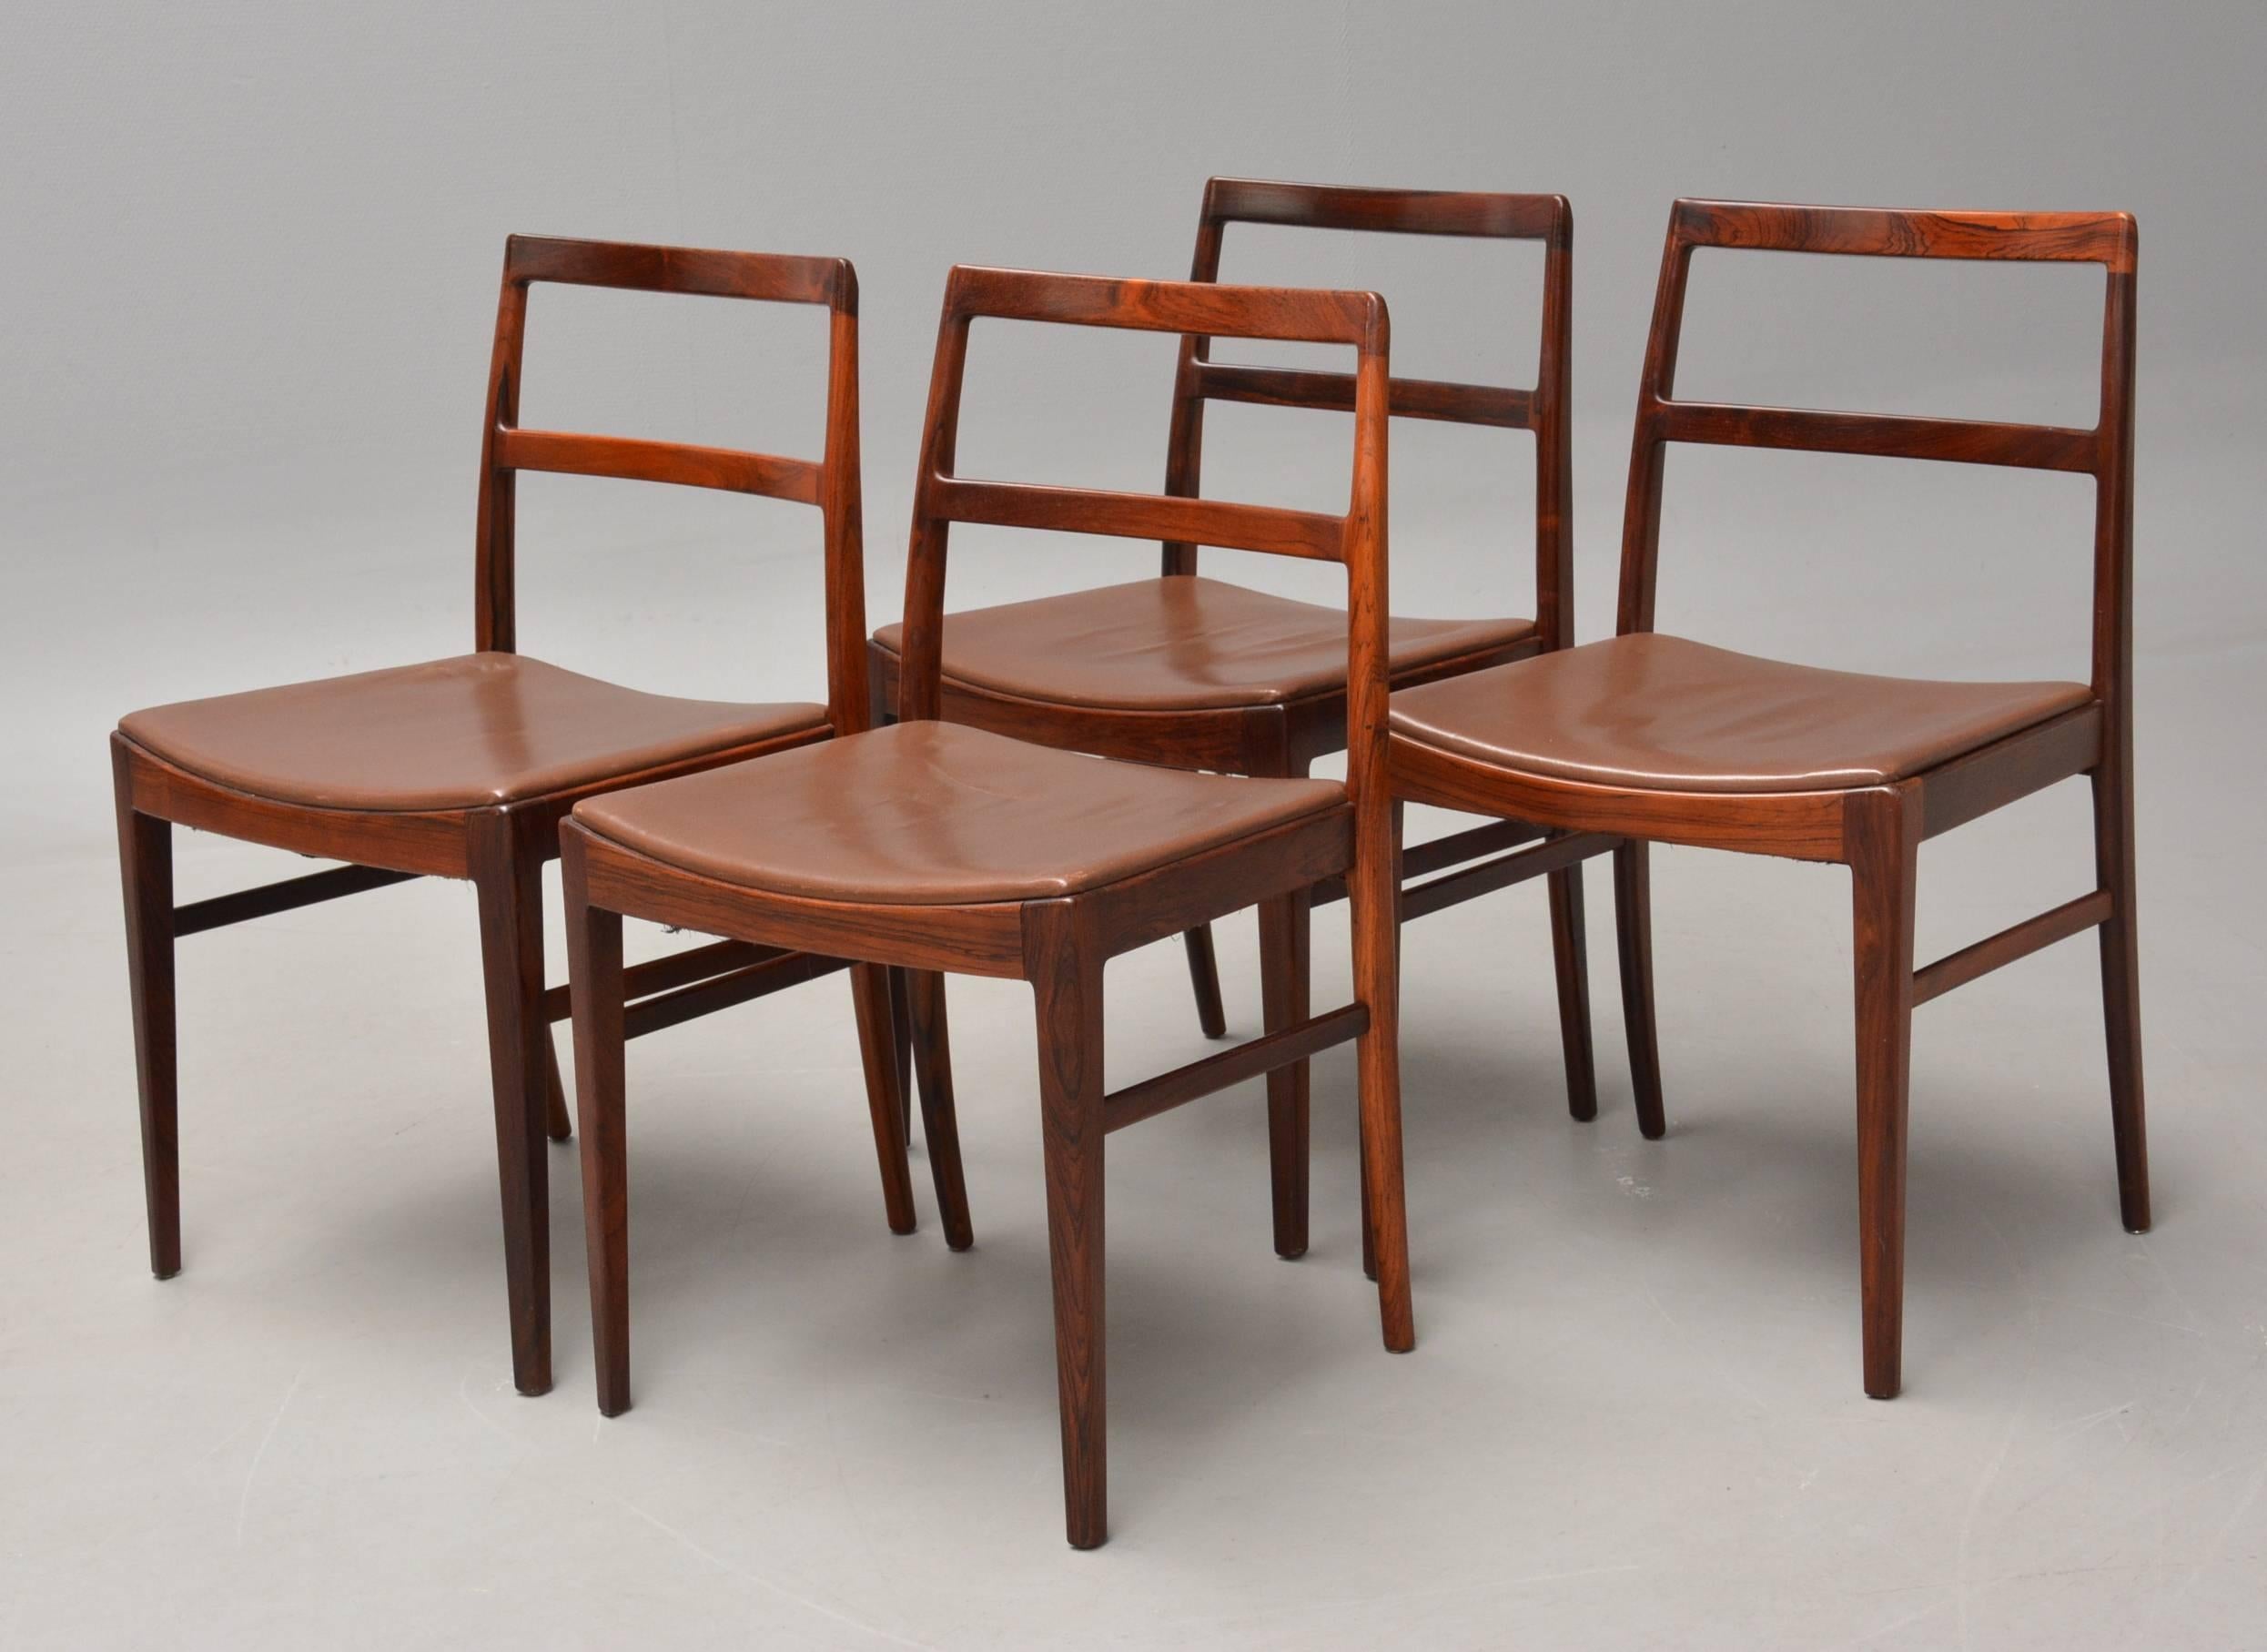 Set of 4 Model 430 dining chairs designed by Arne Vodder for Sibast Møbelfabrik. 

The chairs are made from rosewood and are - with their elegant design and joints that are hardly visible but float into each other - evidence of the superb design and